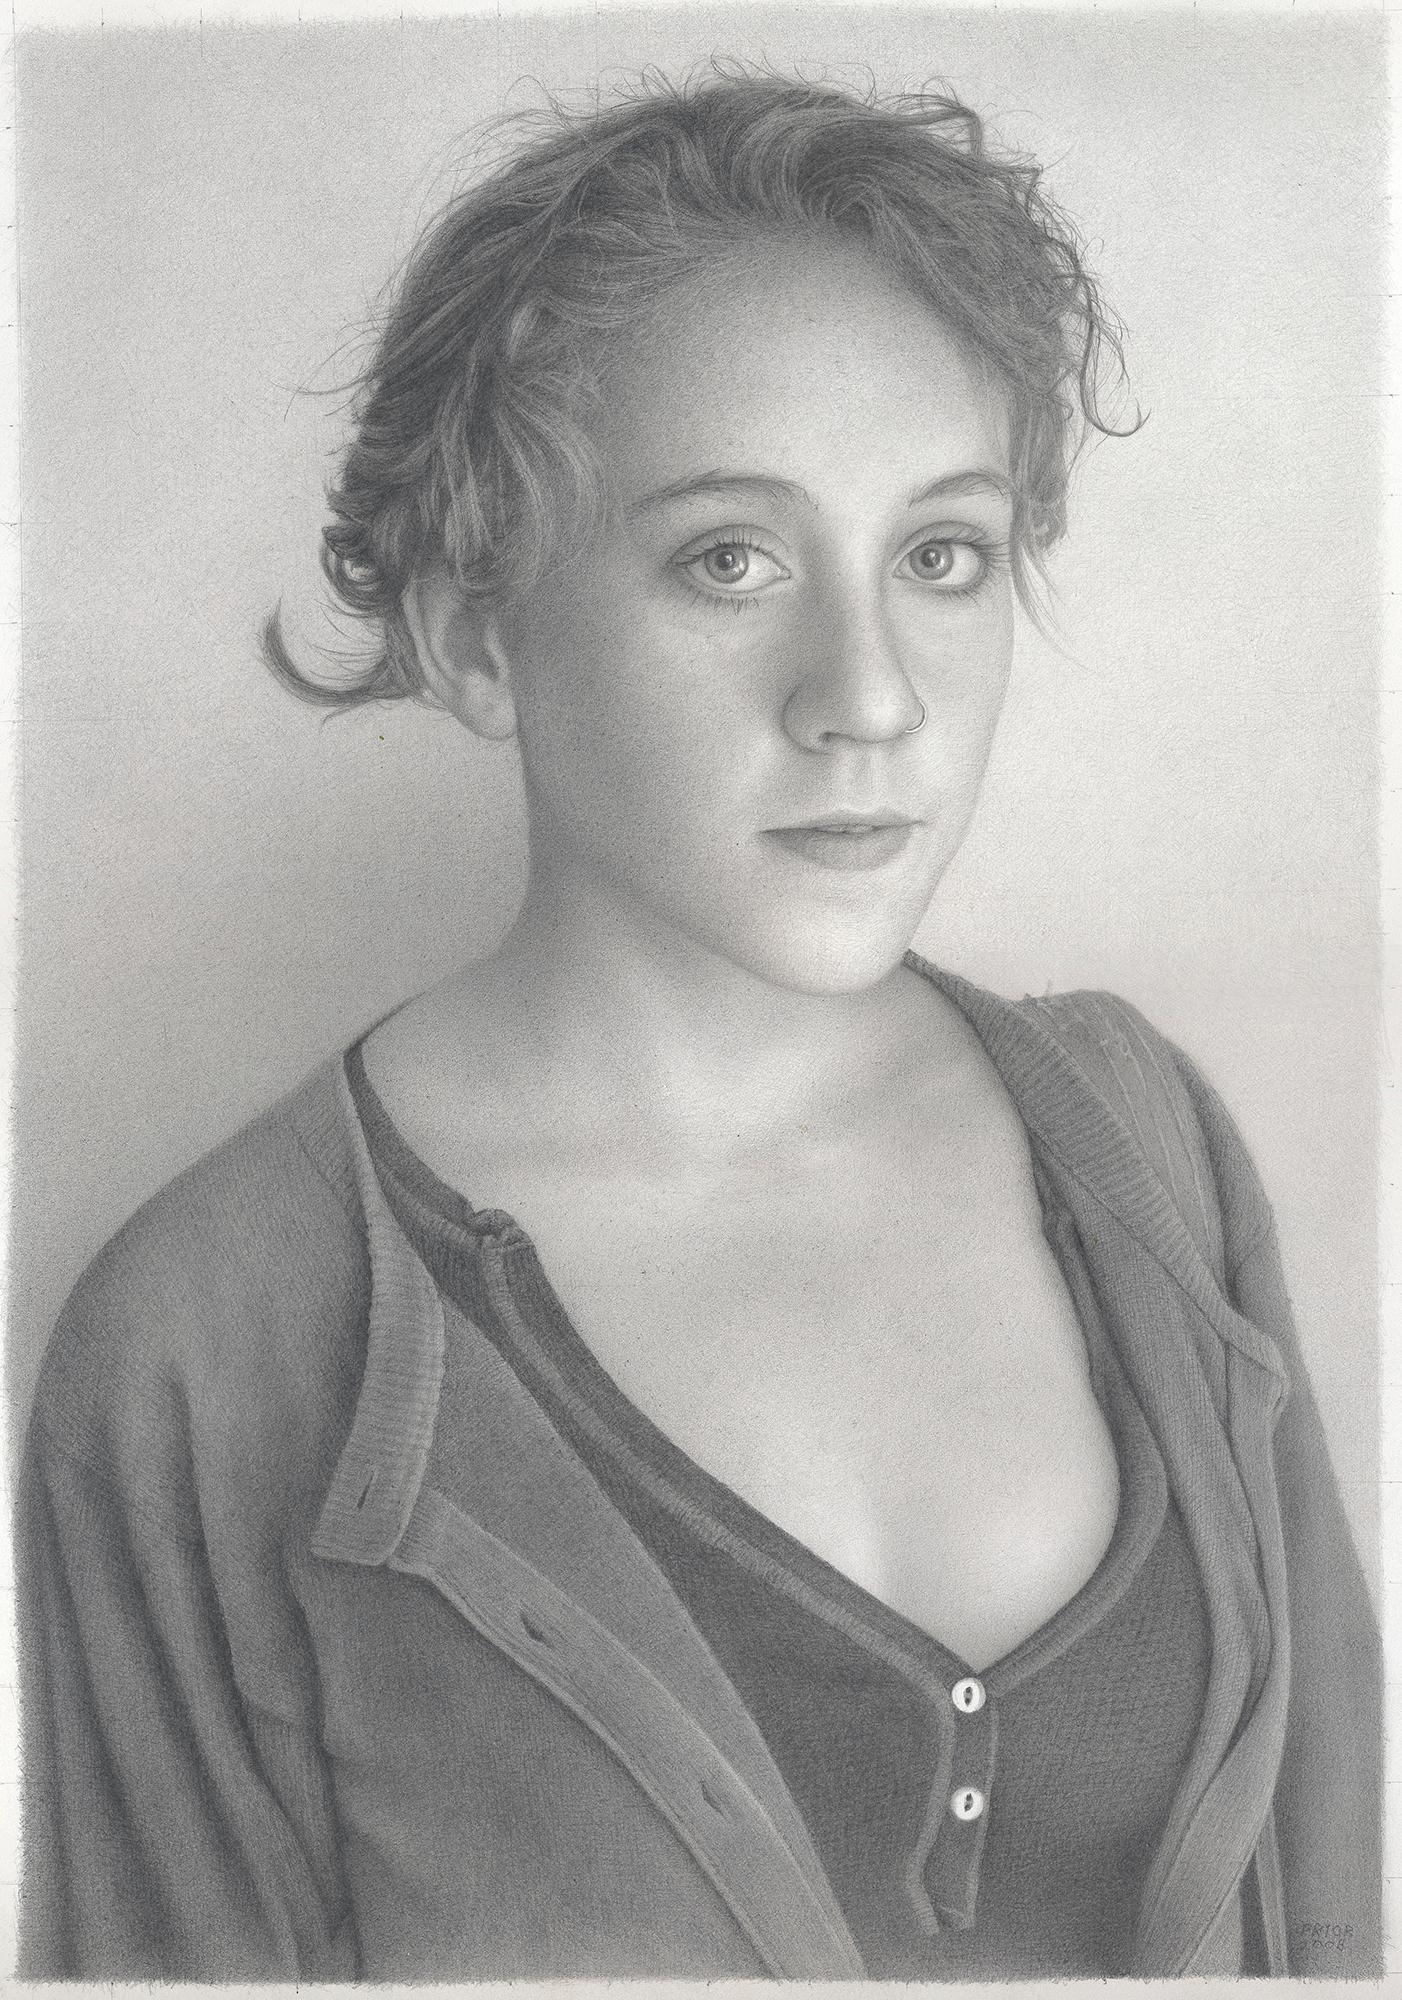 Scott Prior Figurative Art - Realist drawing of a young woman "Nellie" graphite on paper